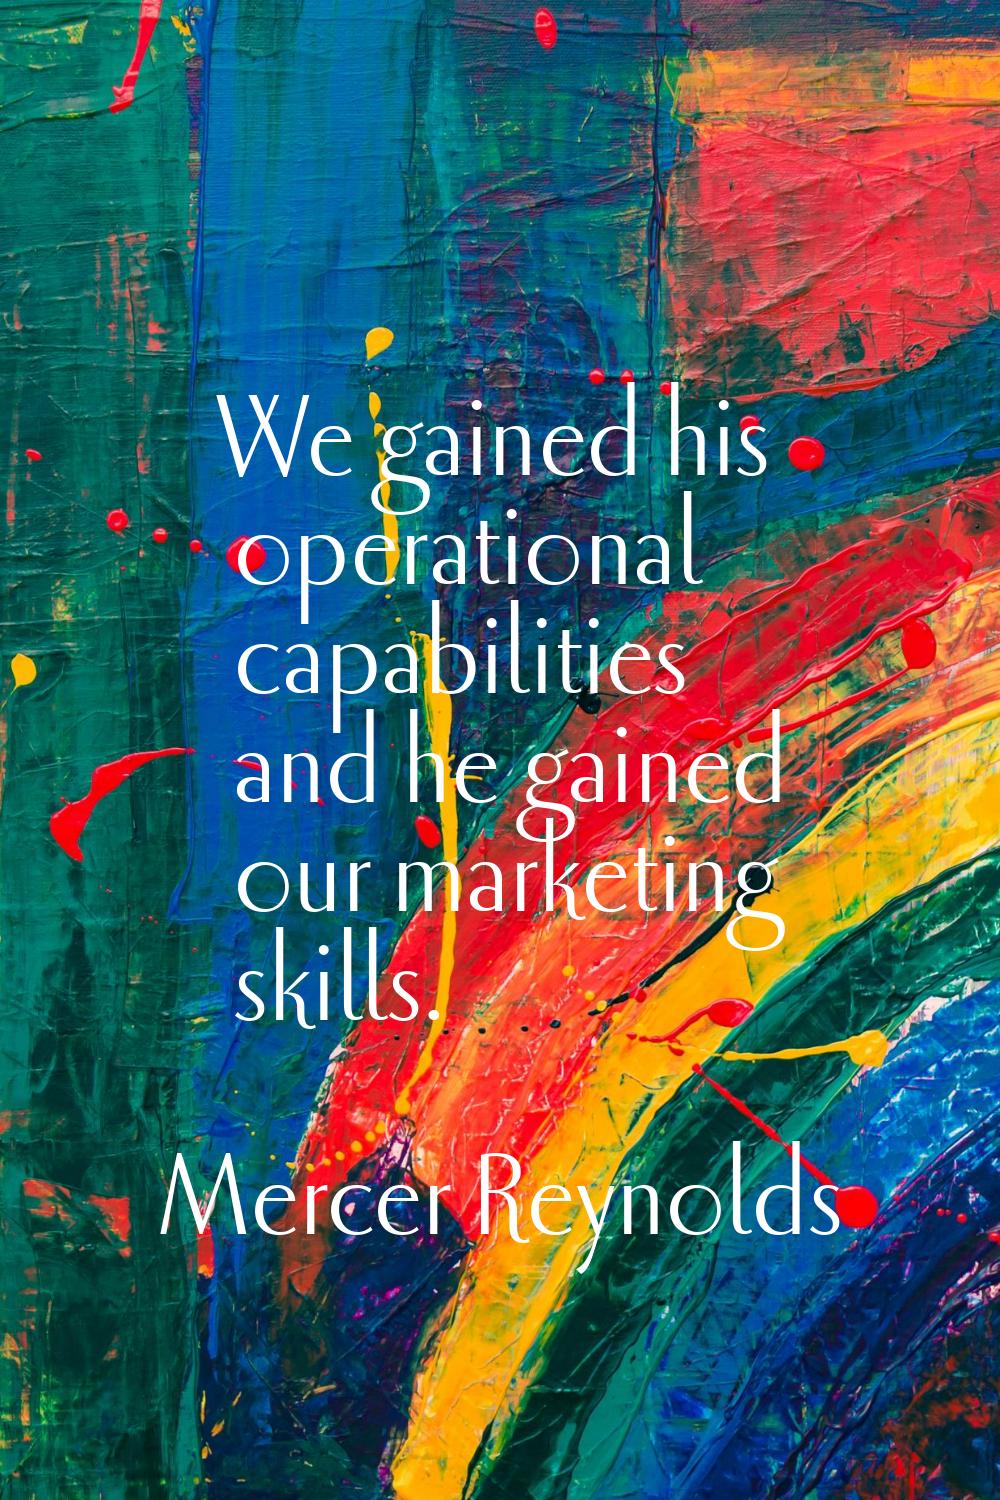 We gained his operational capabilities and he gained our marketing skills.